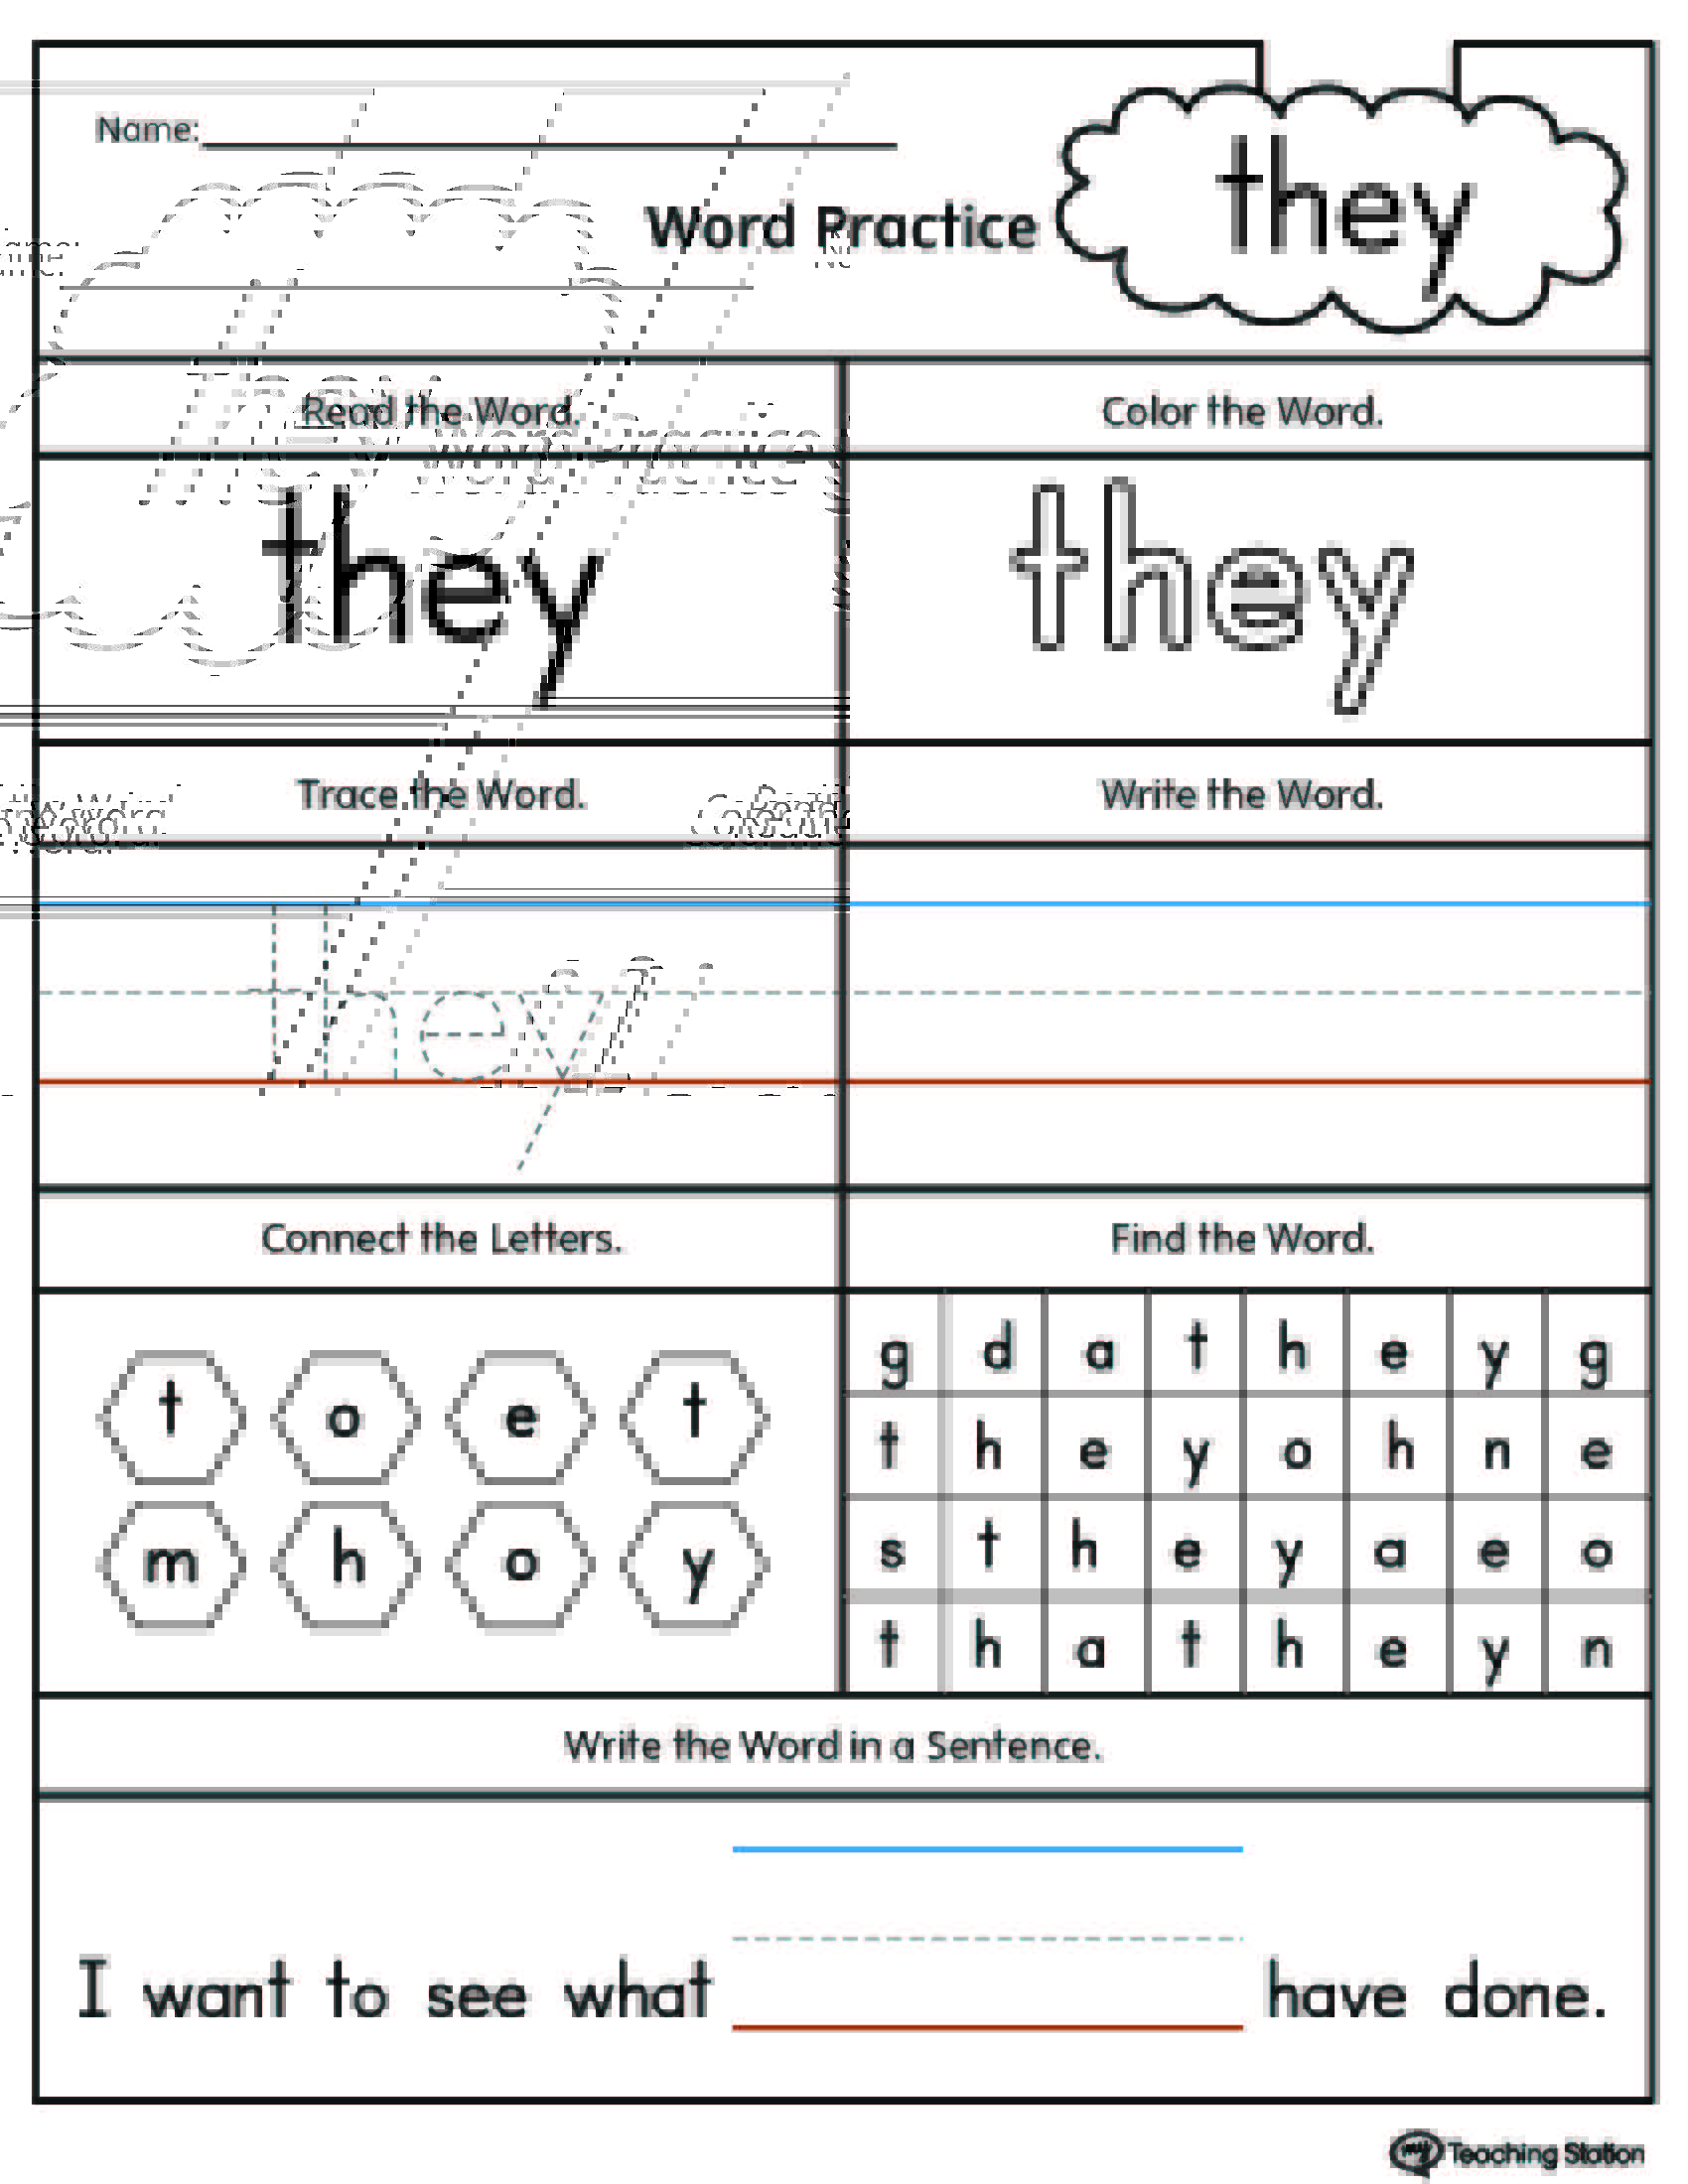 high-frequency-words-printable-worksheets-myteachingstation